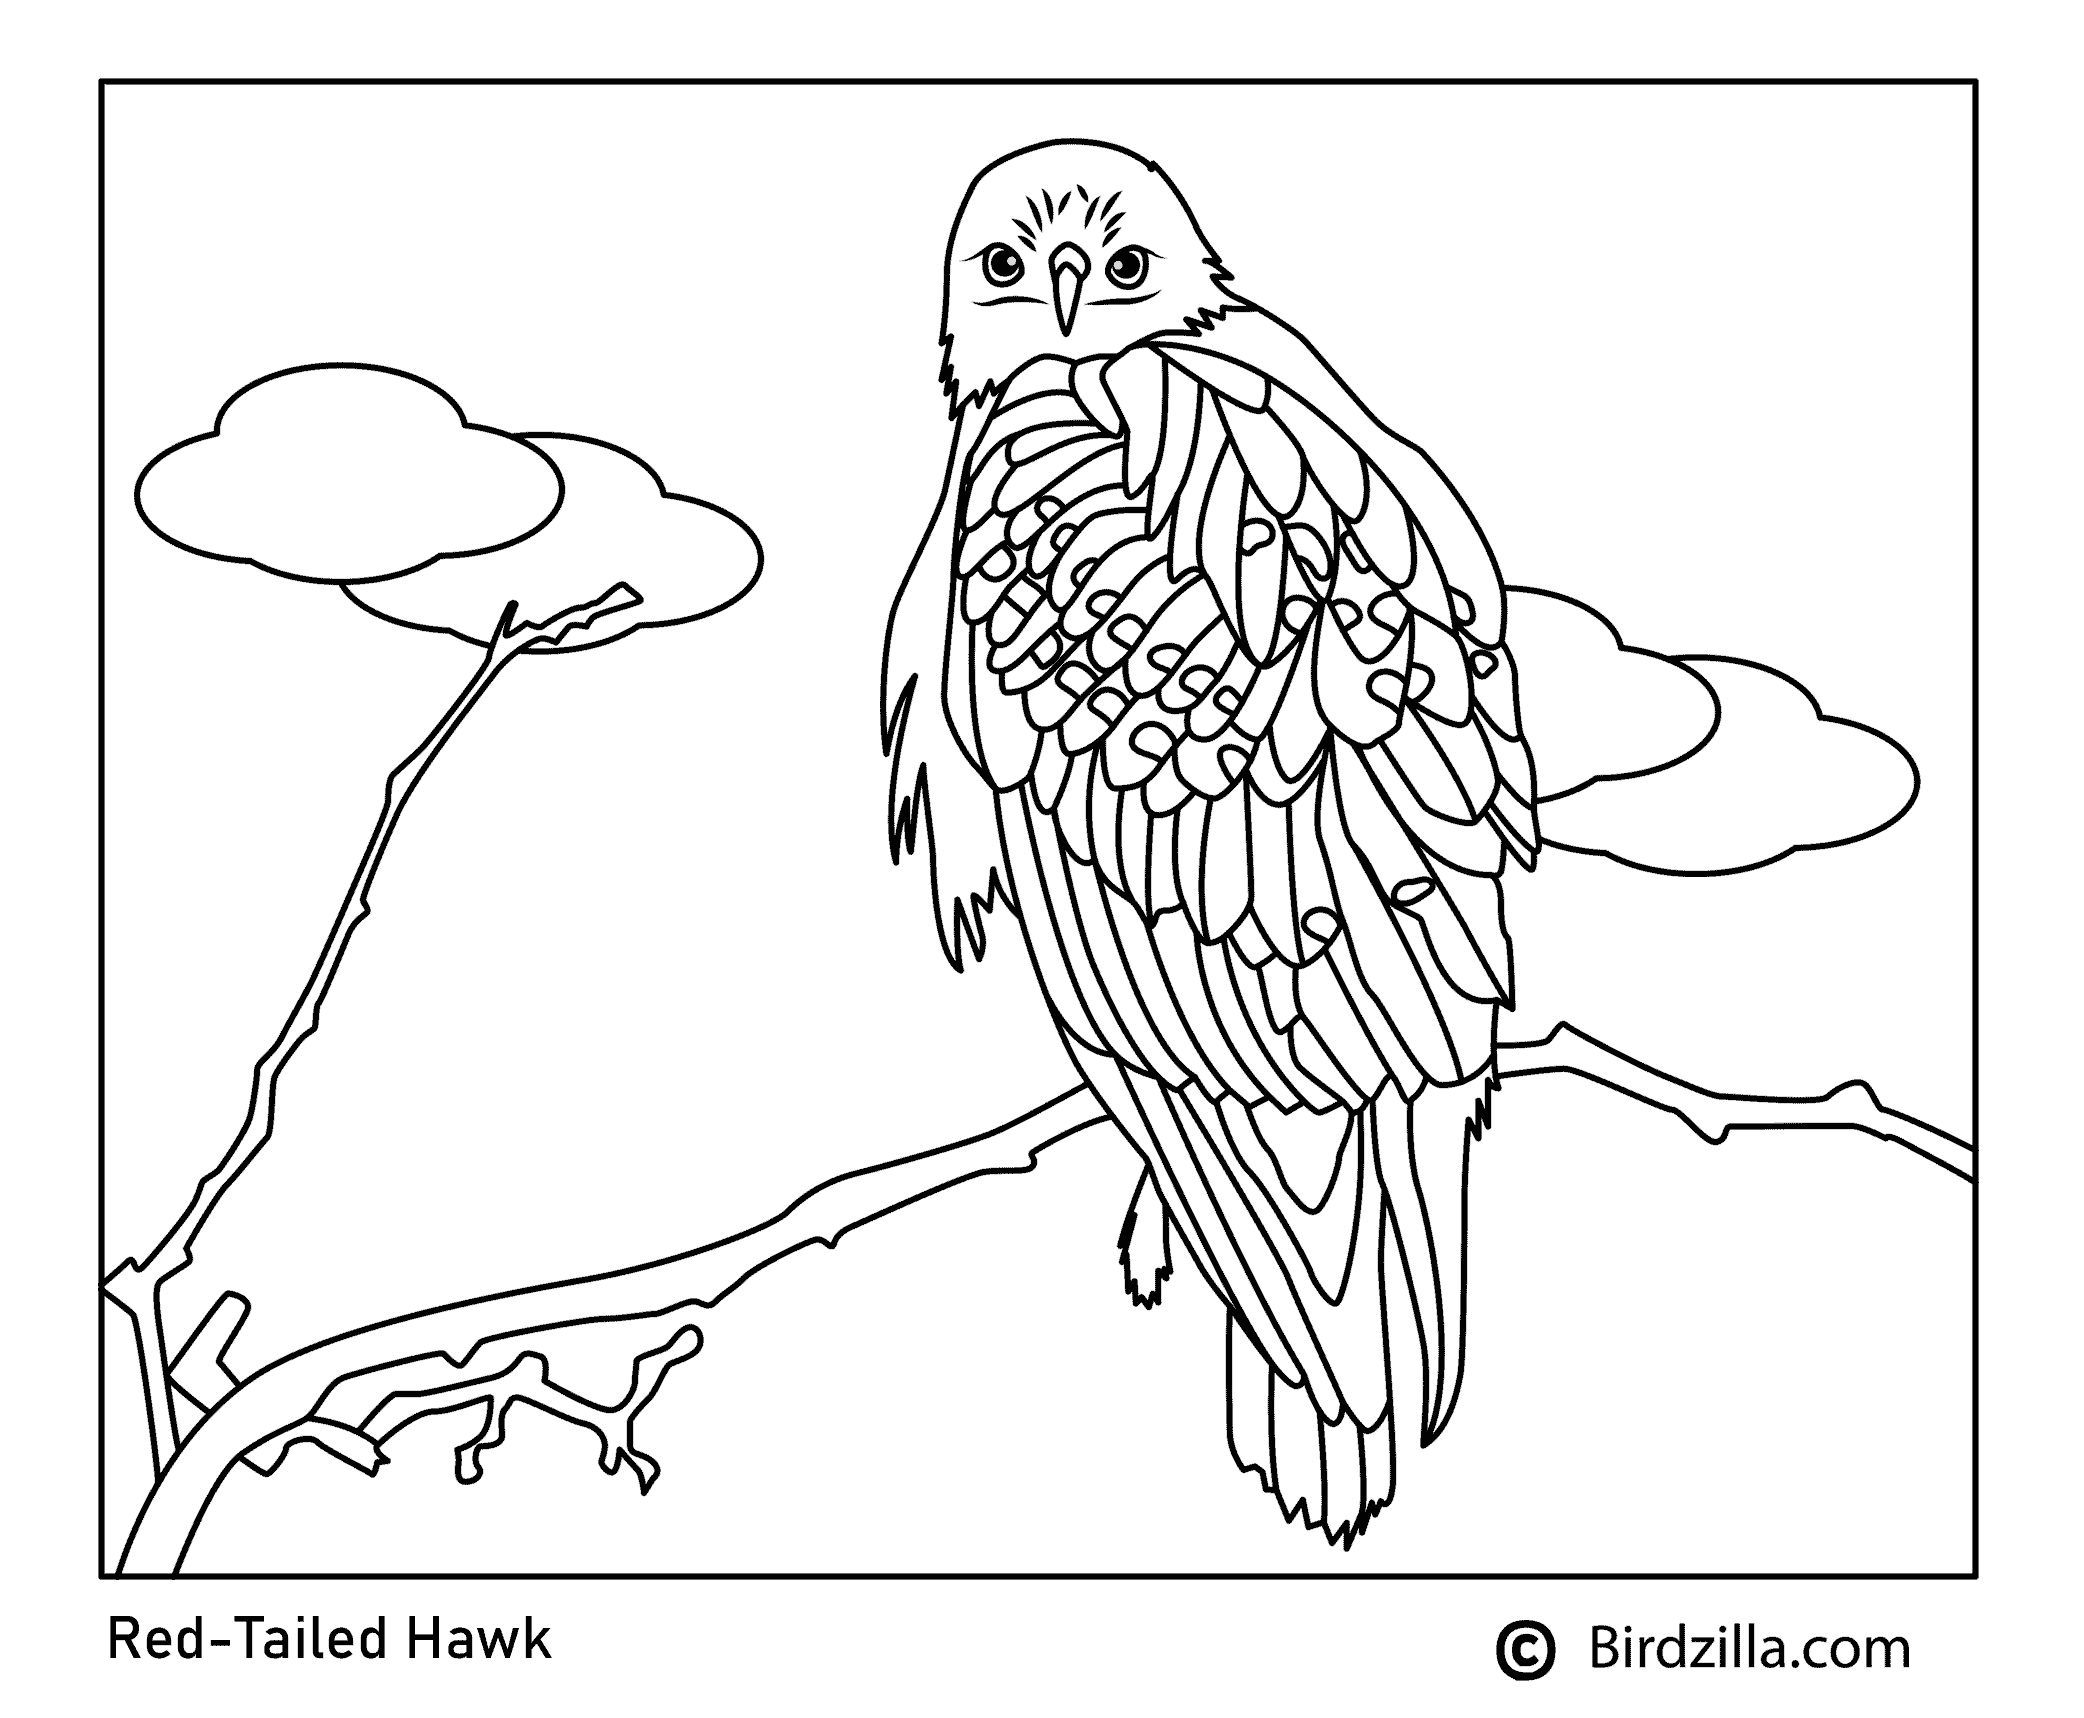 Red-tailed hawk coloring page